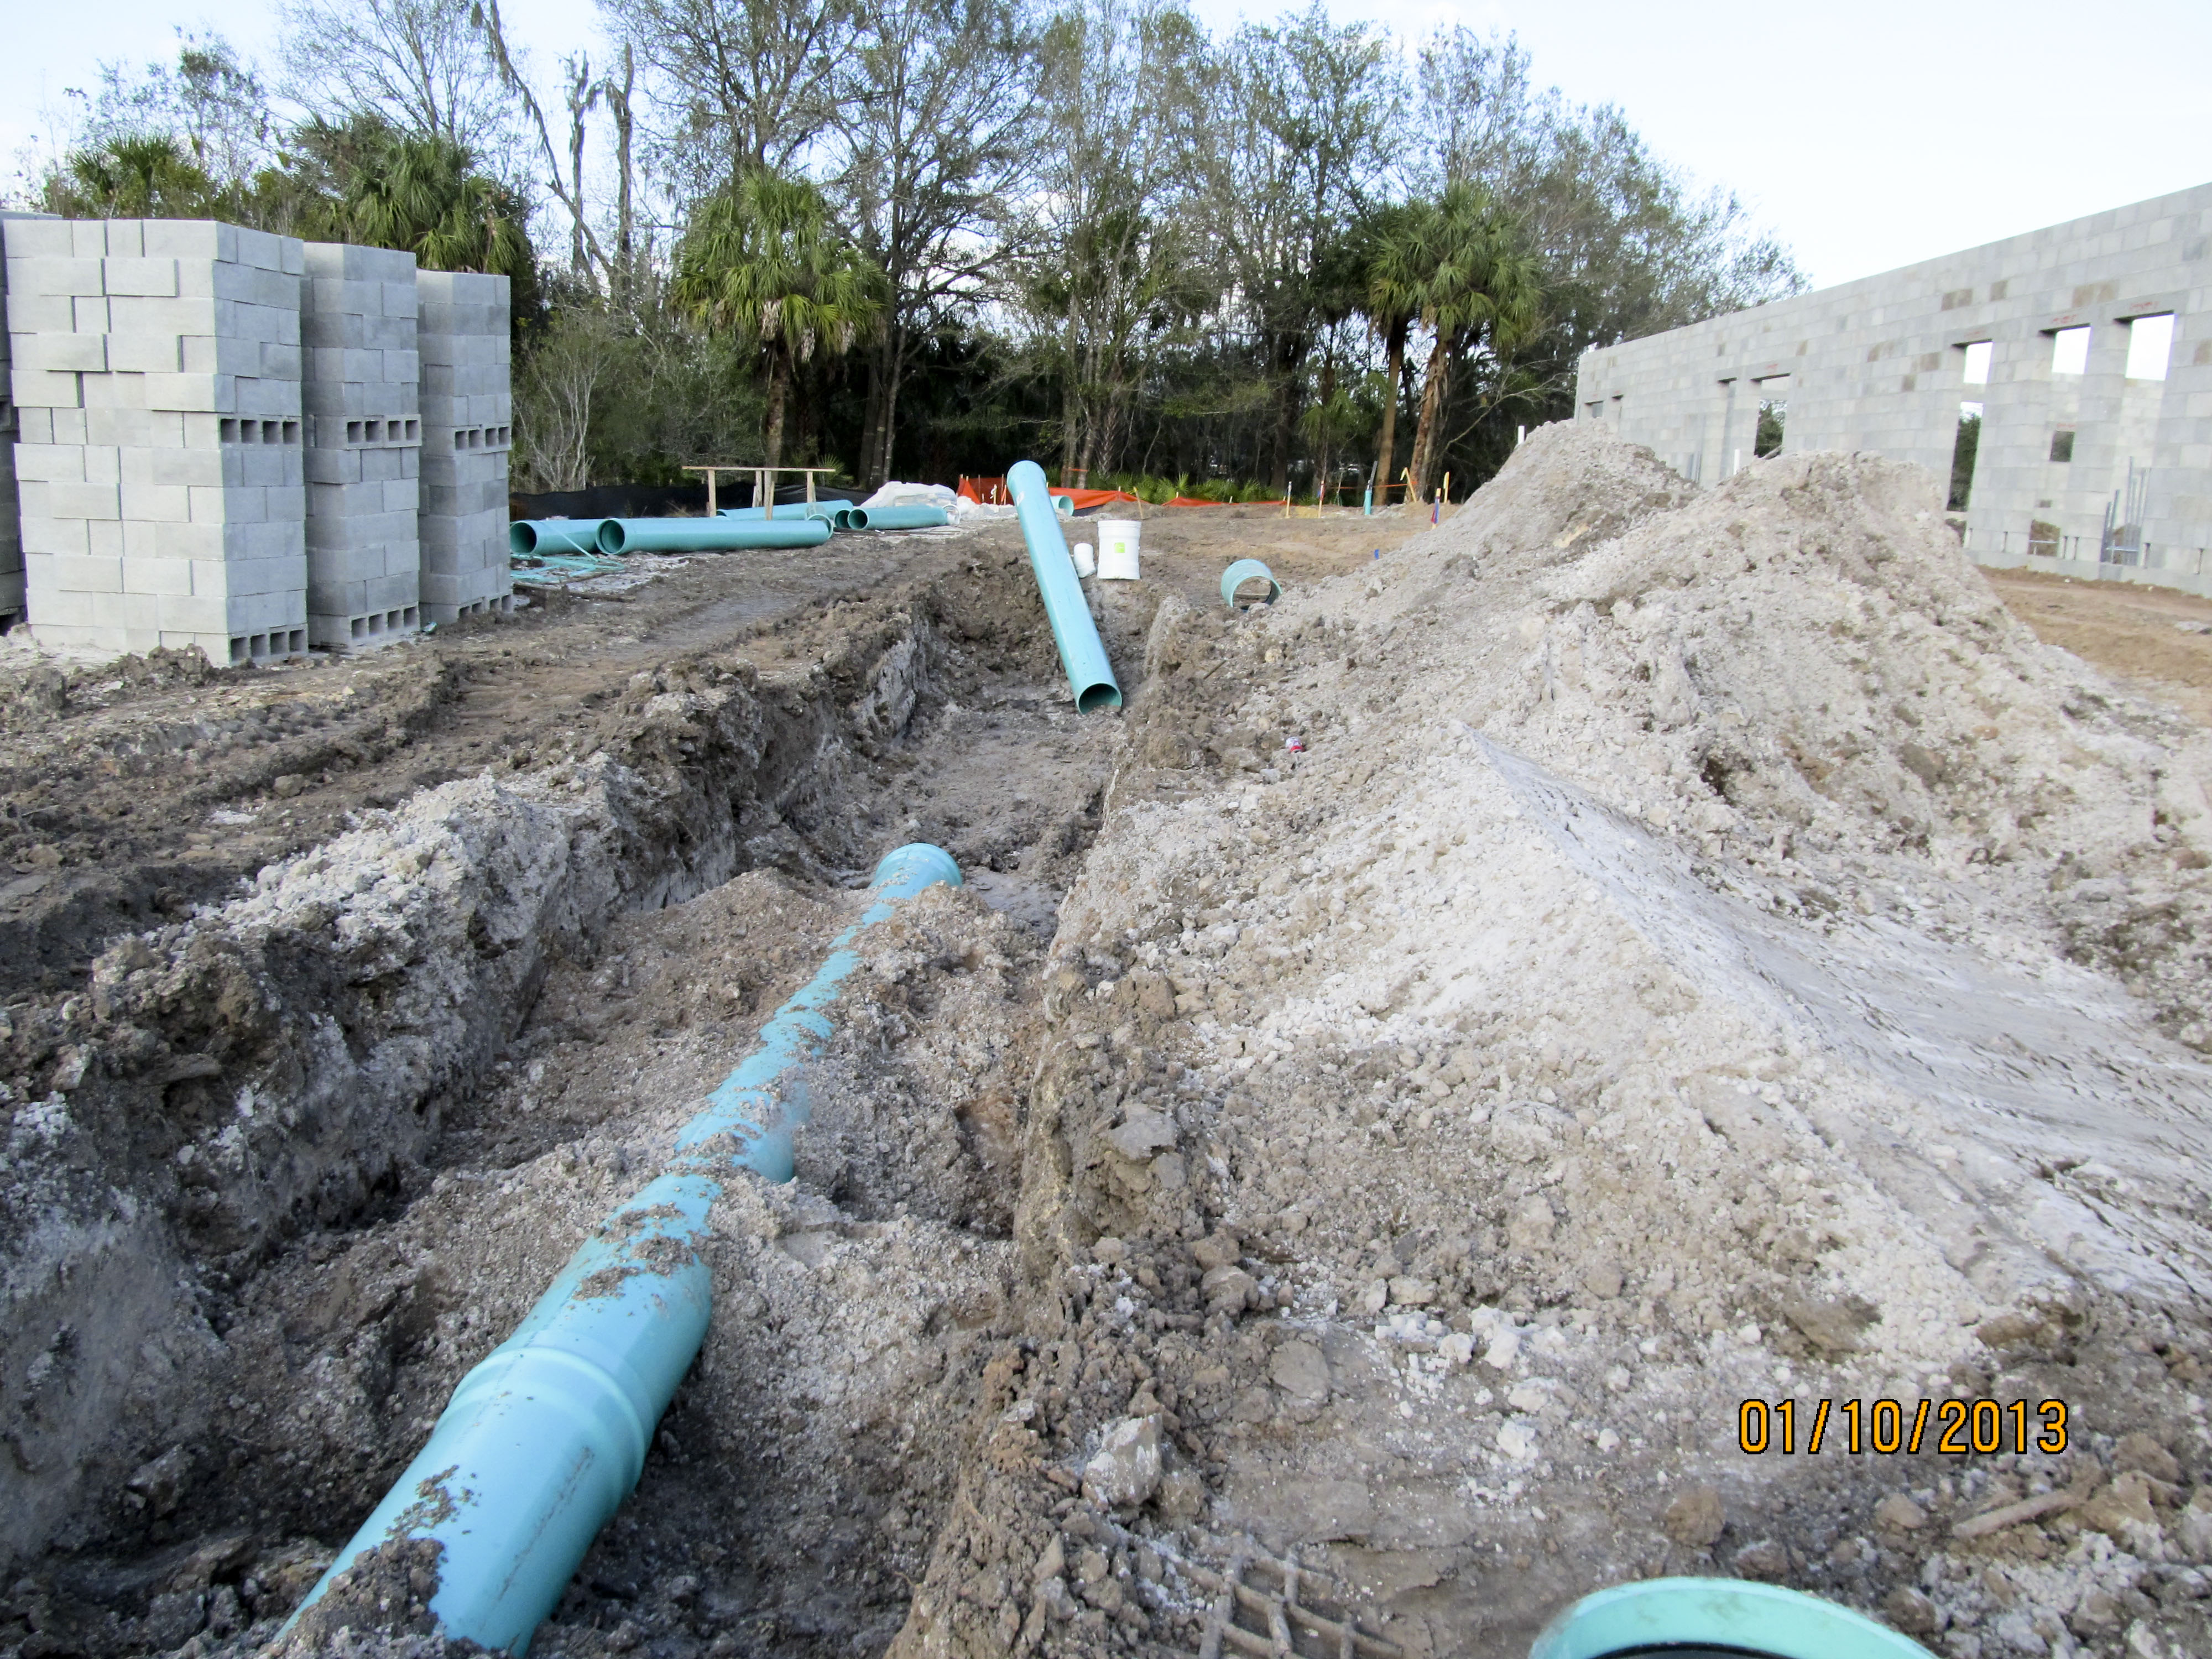 Utility pipes are laid in the ditches.